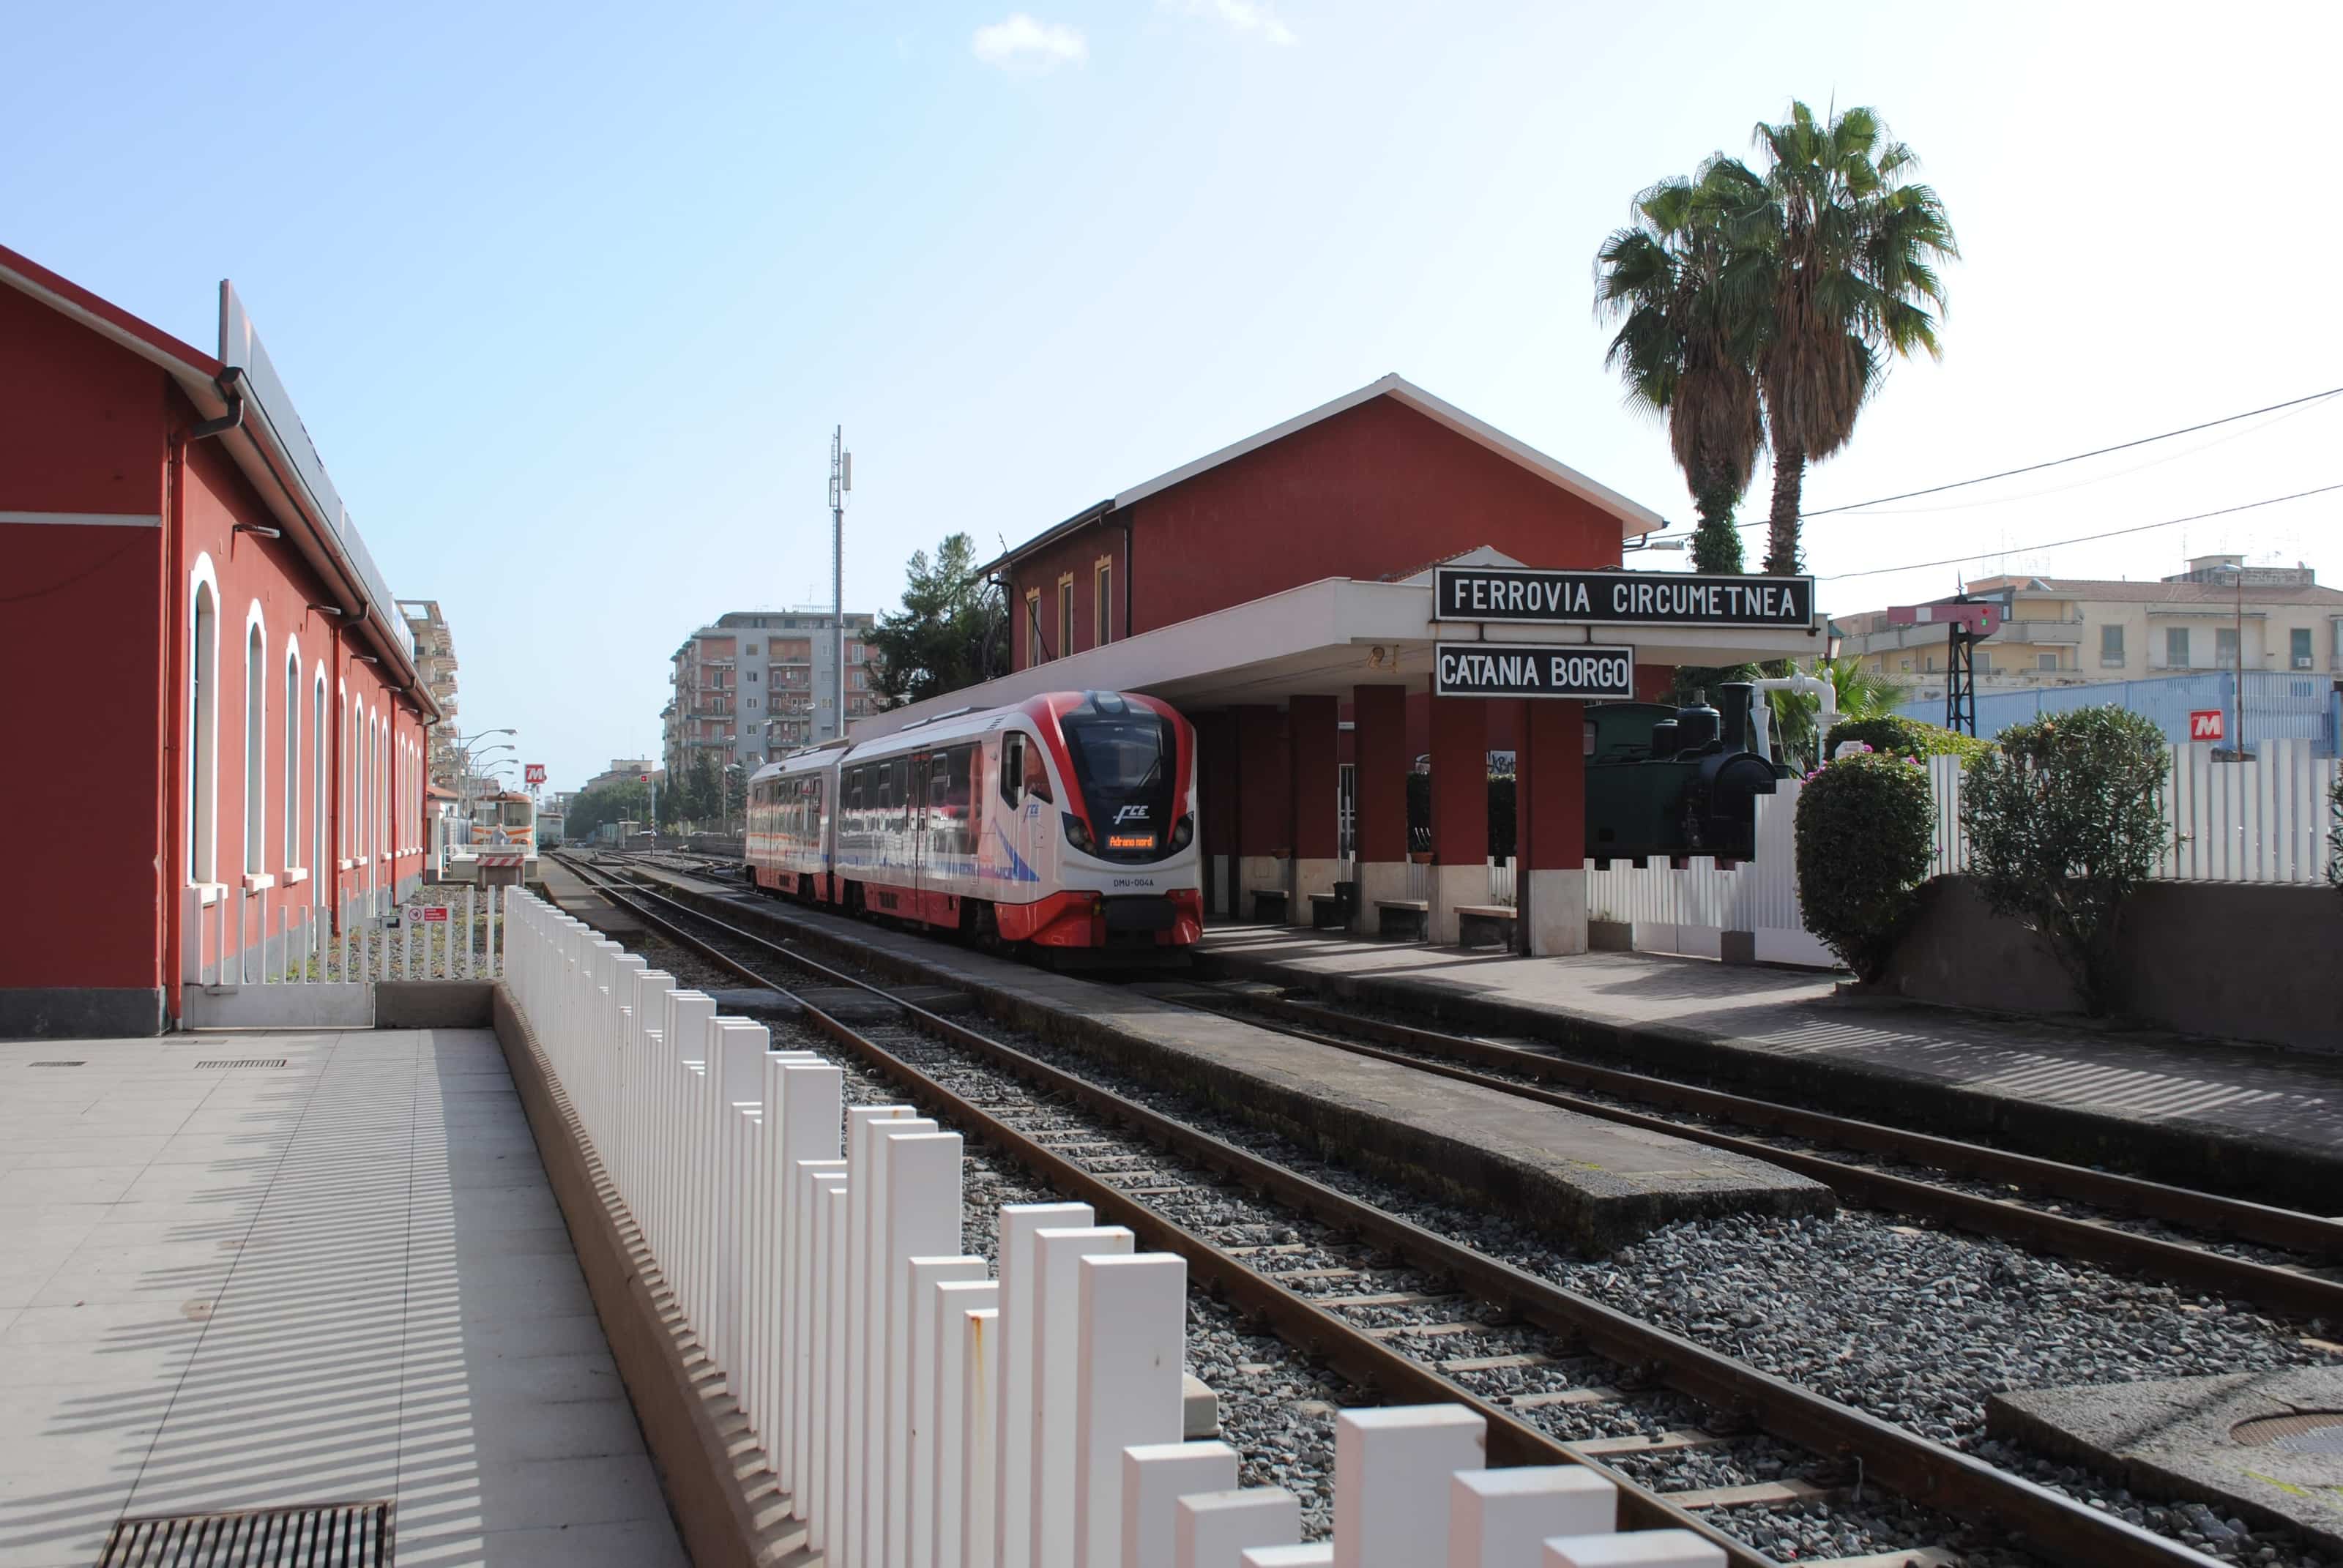 The newly opened city-train line in Catania